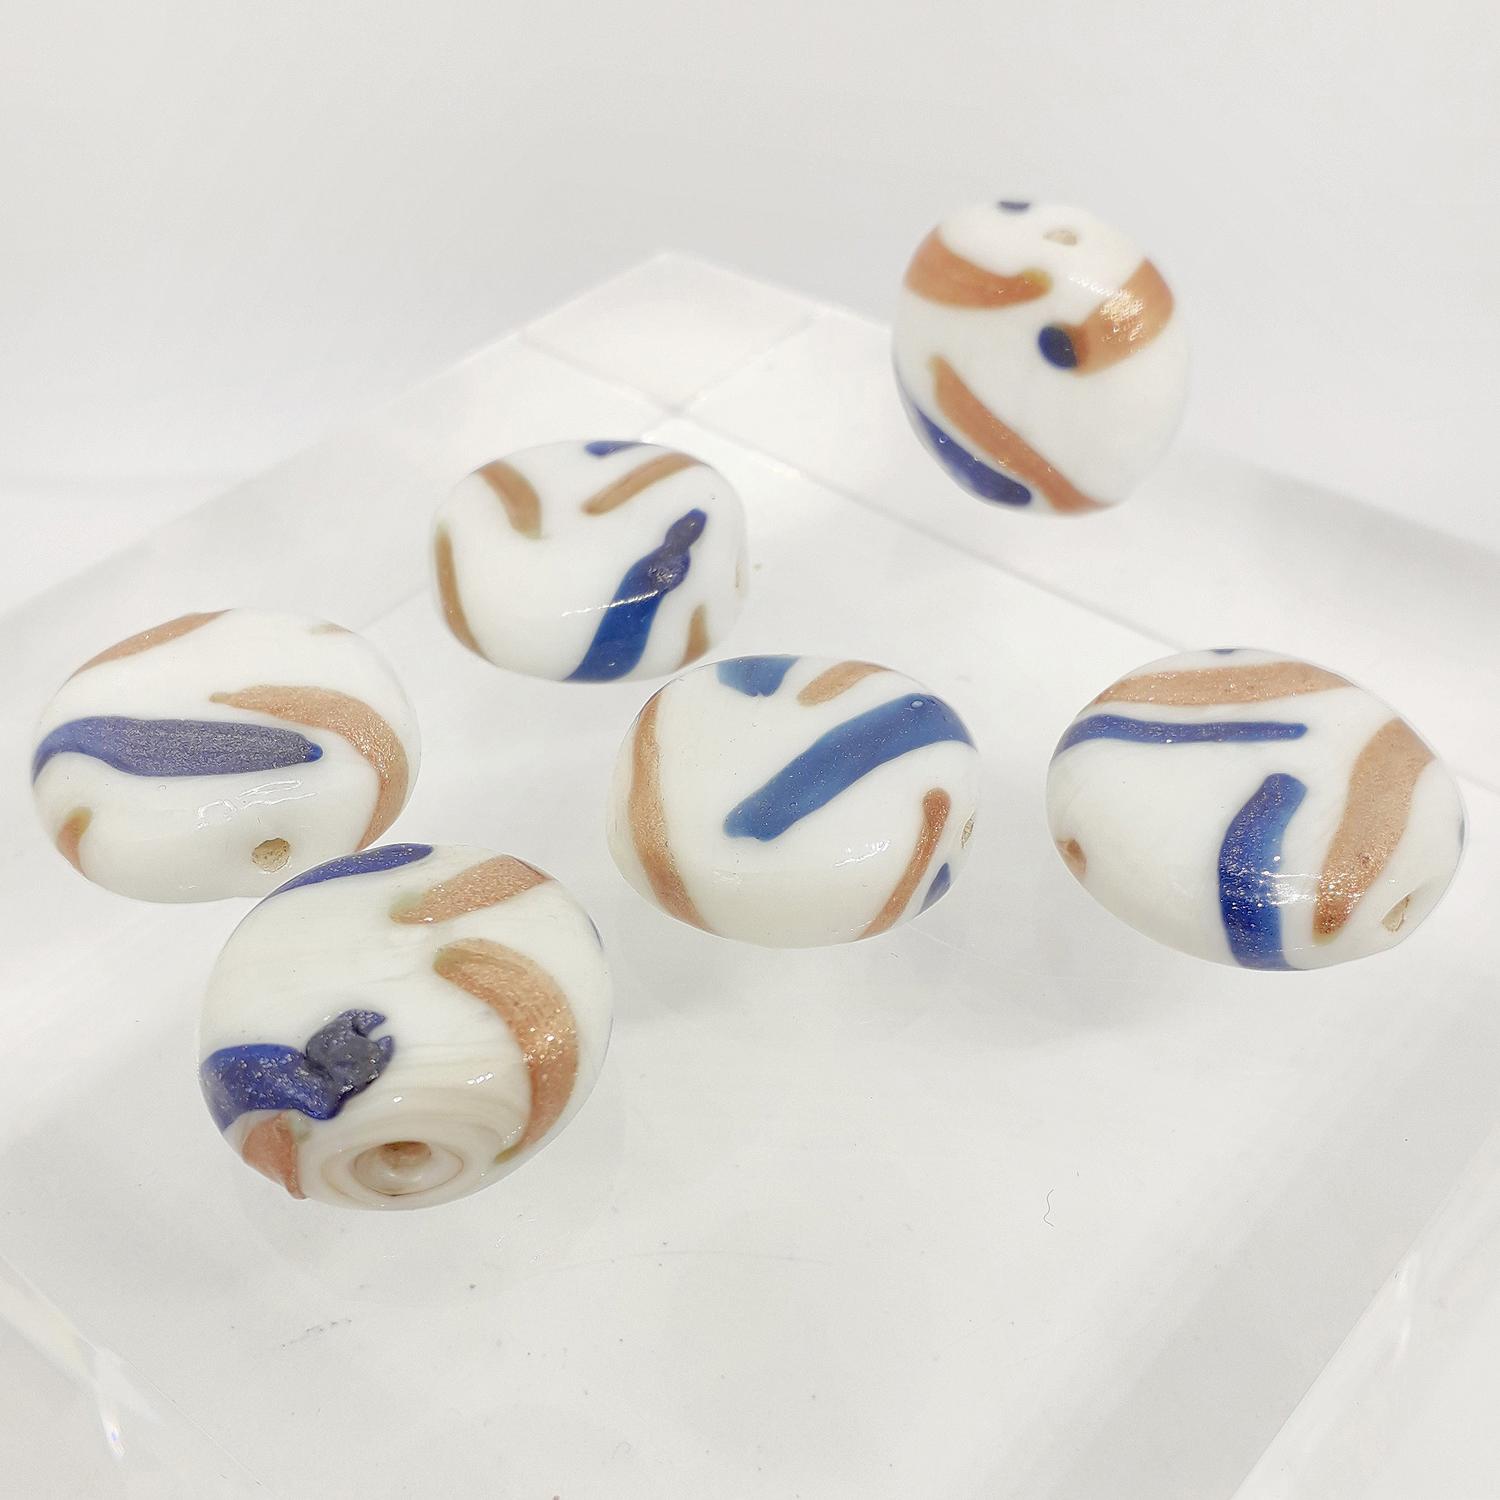 20mm White Glass Rounded Square Bead with Gold Shimmer and Navy Blue Stripes